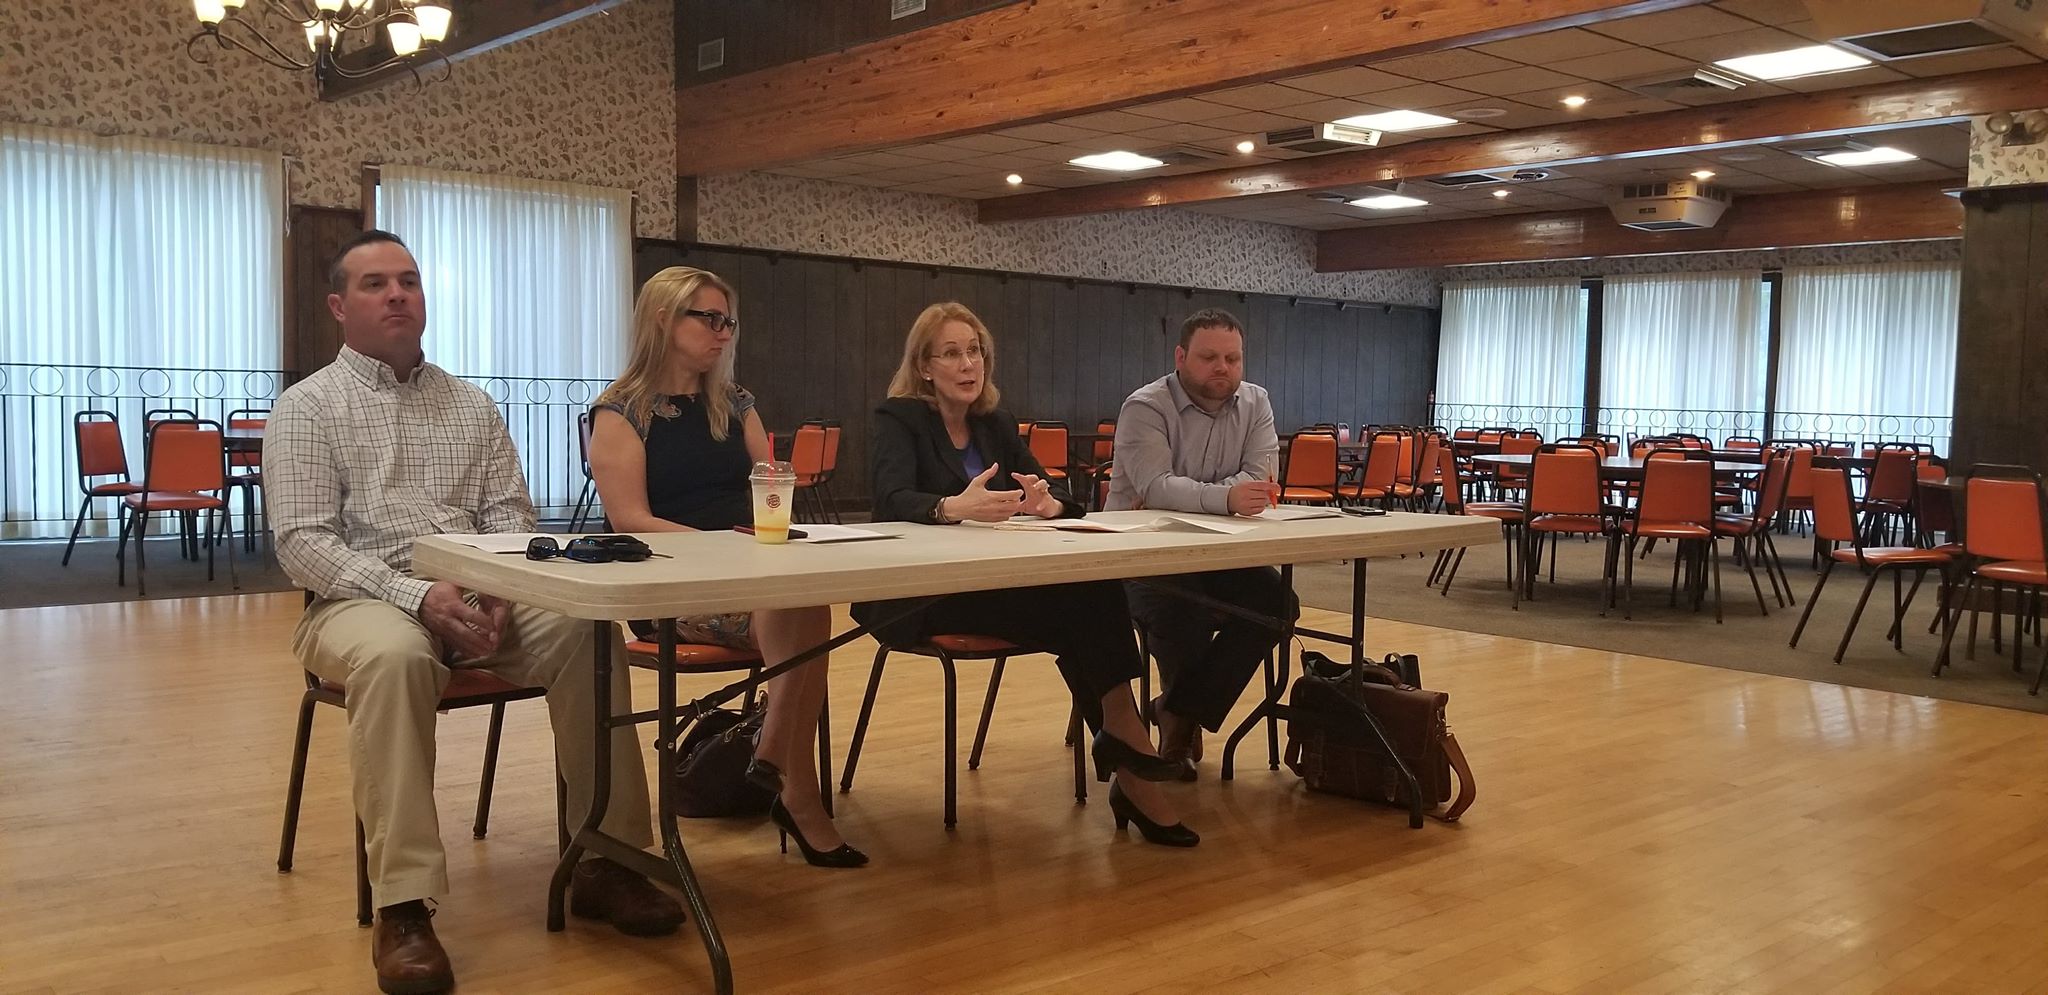 At Community Outreach Meeting in 2018